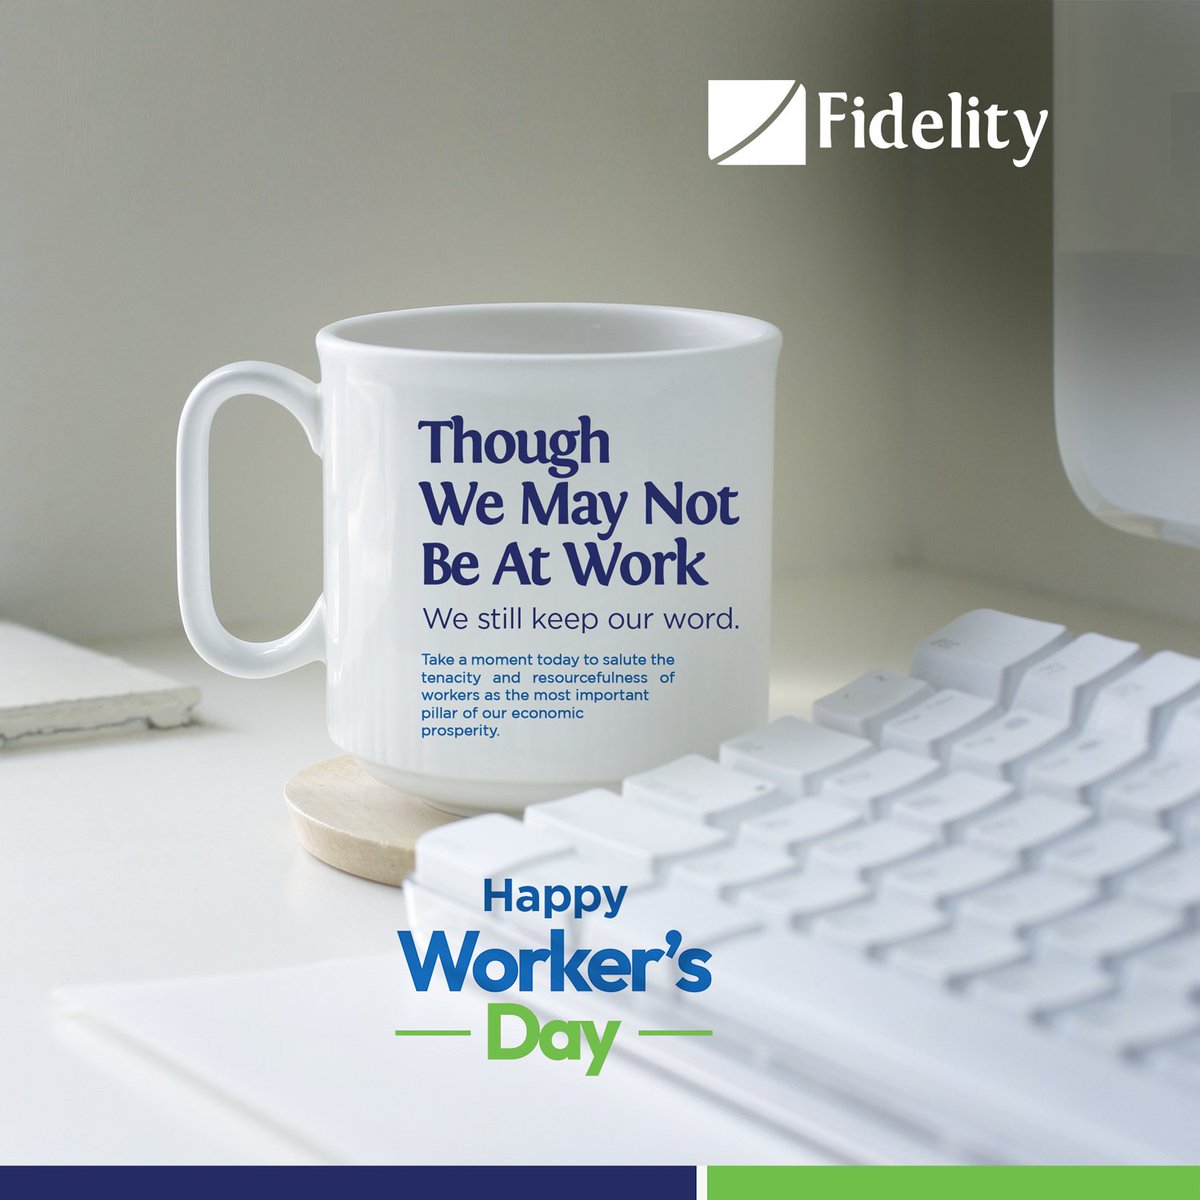 Though we may not be at work, We Still Keep Our Word. Happy Worker's Day from all of us at Fidelity Bank

#Workersday2024
#Mayday
#WeKeepOurWord